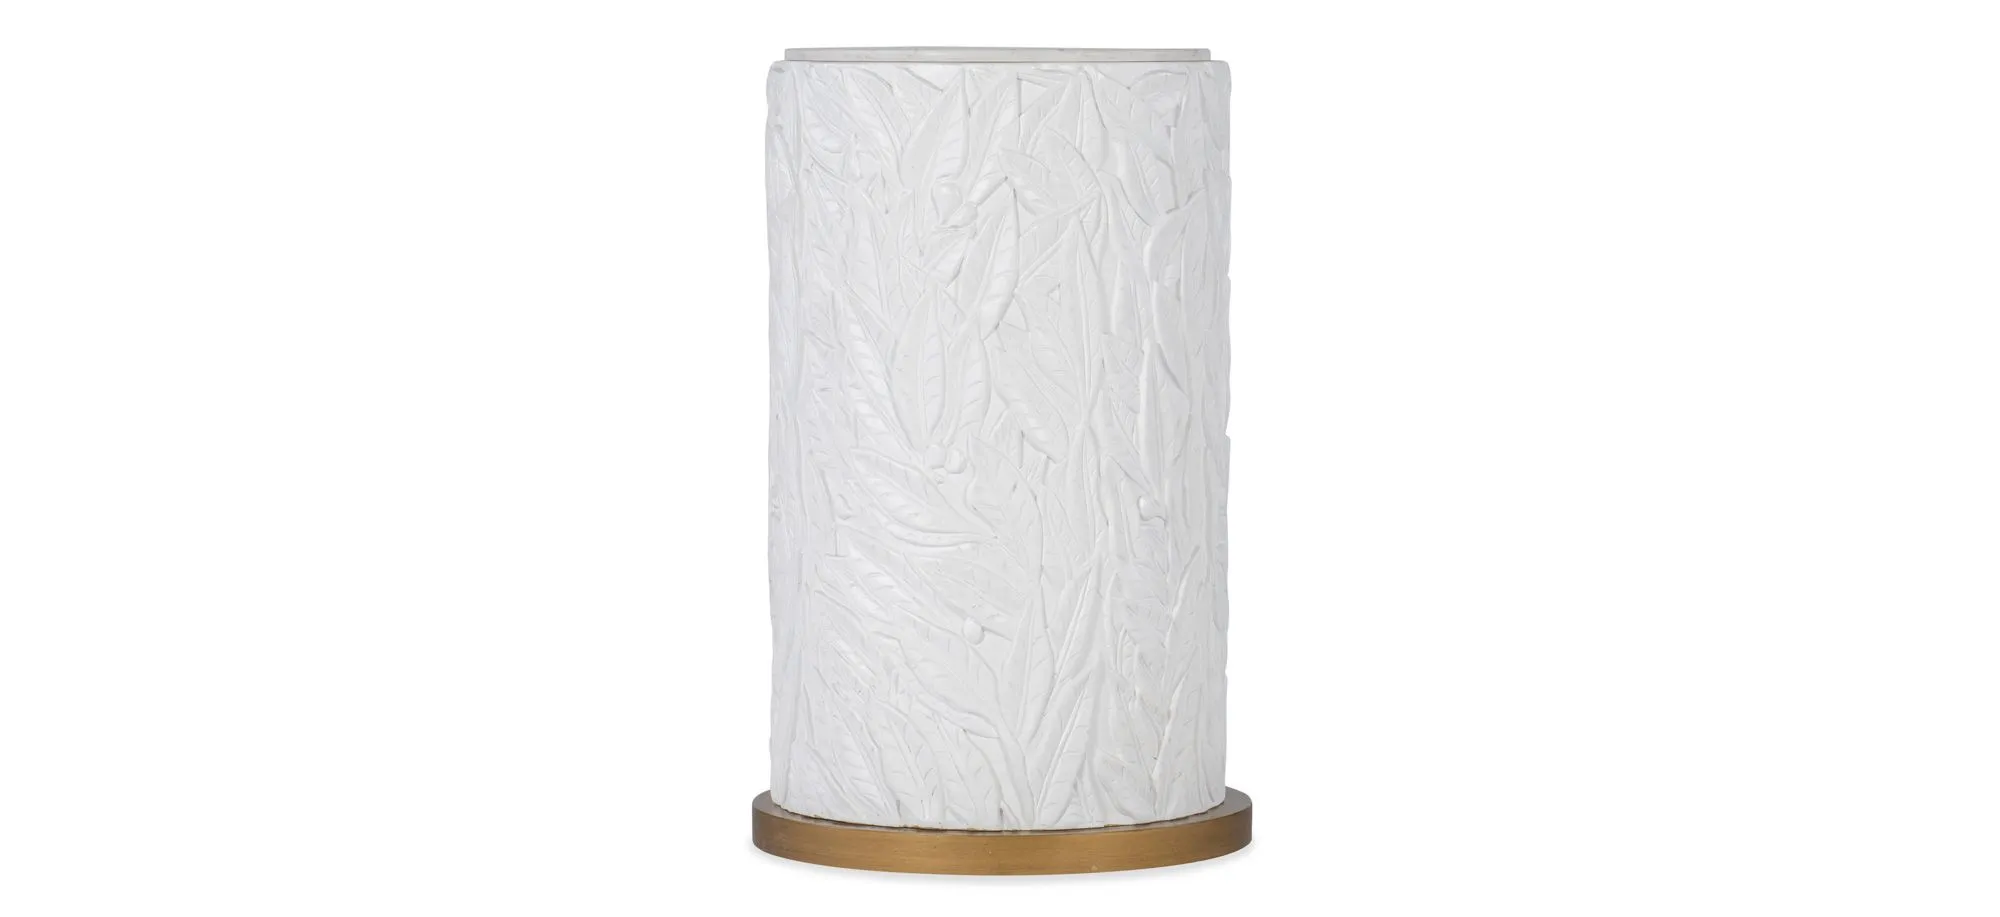 Melange Be-Leaf In Me Accent Table in White quartz top with white leaf motif and brushed gold base by Hooker Furniture